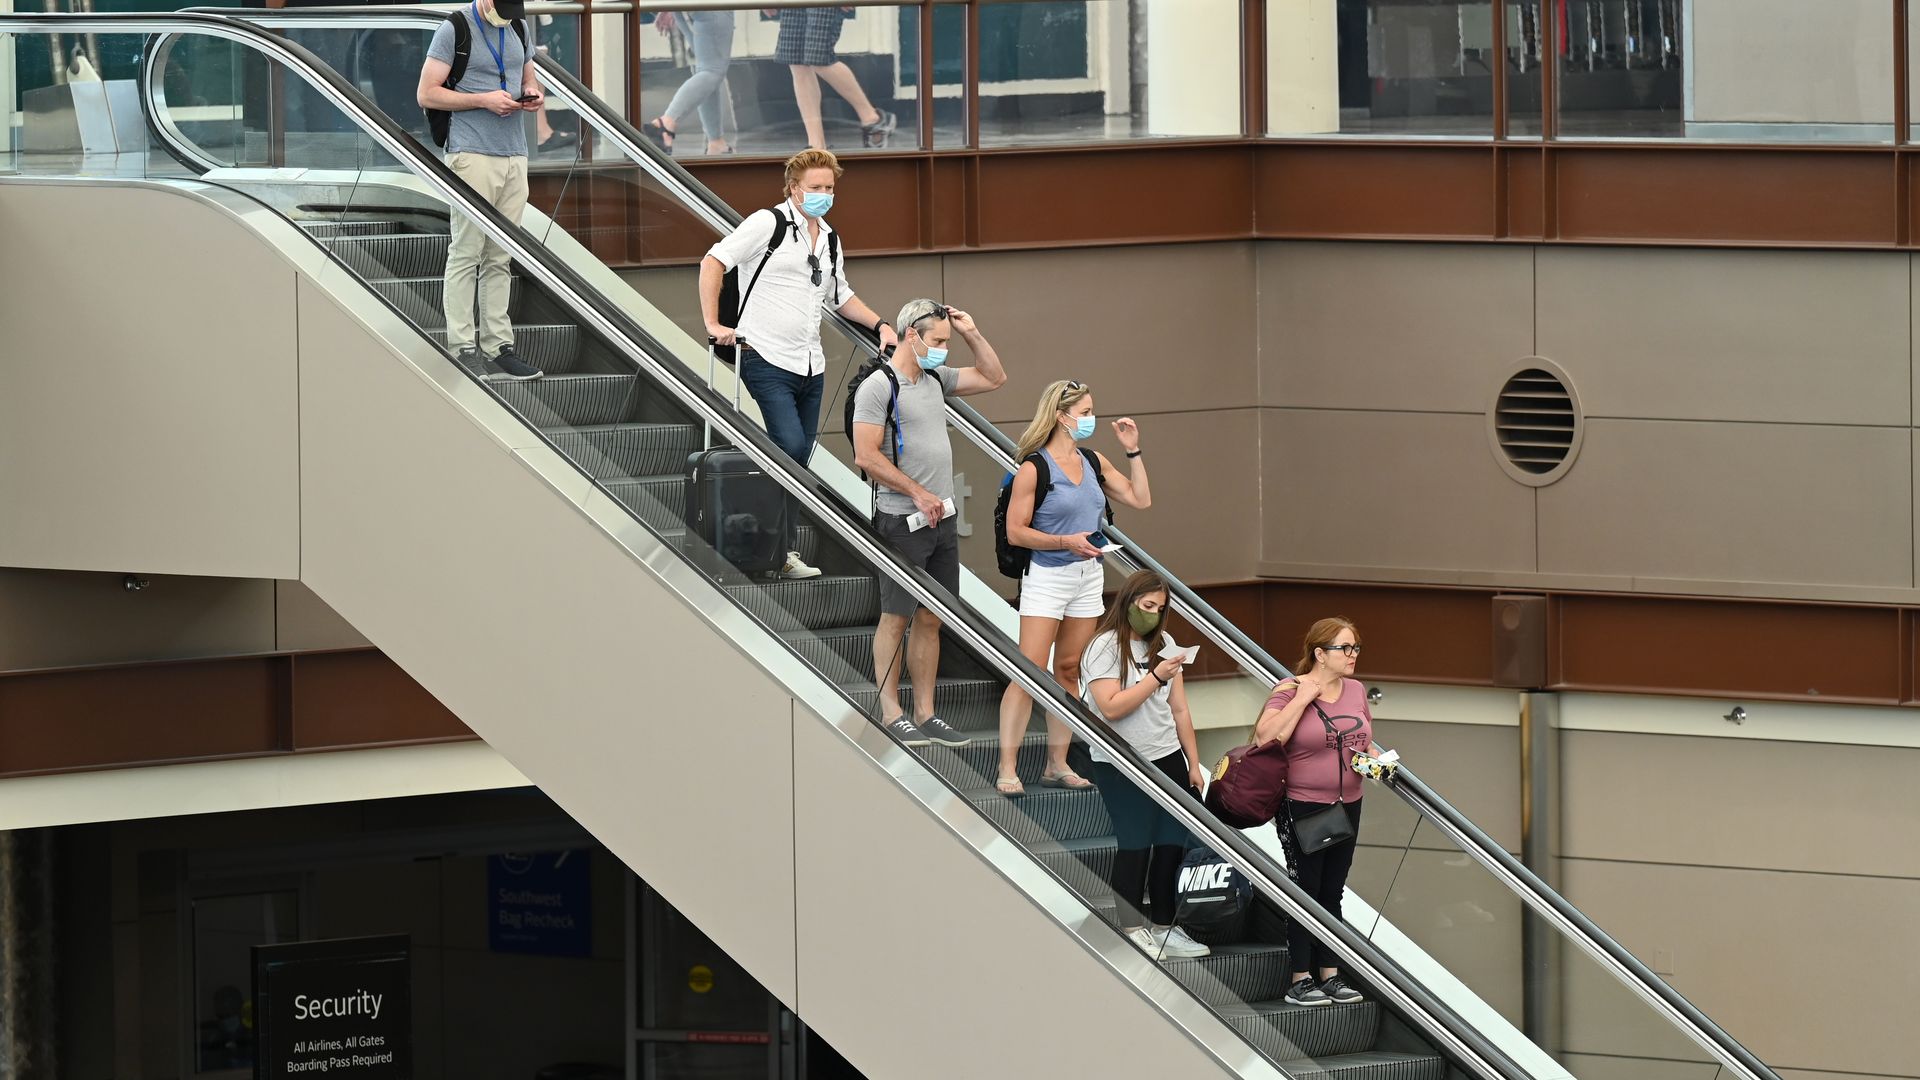 A photo of passengers riding down an escalator with face masks on